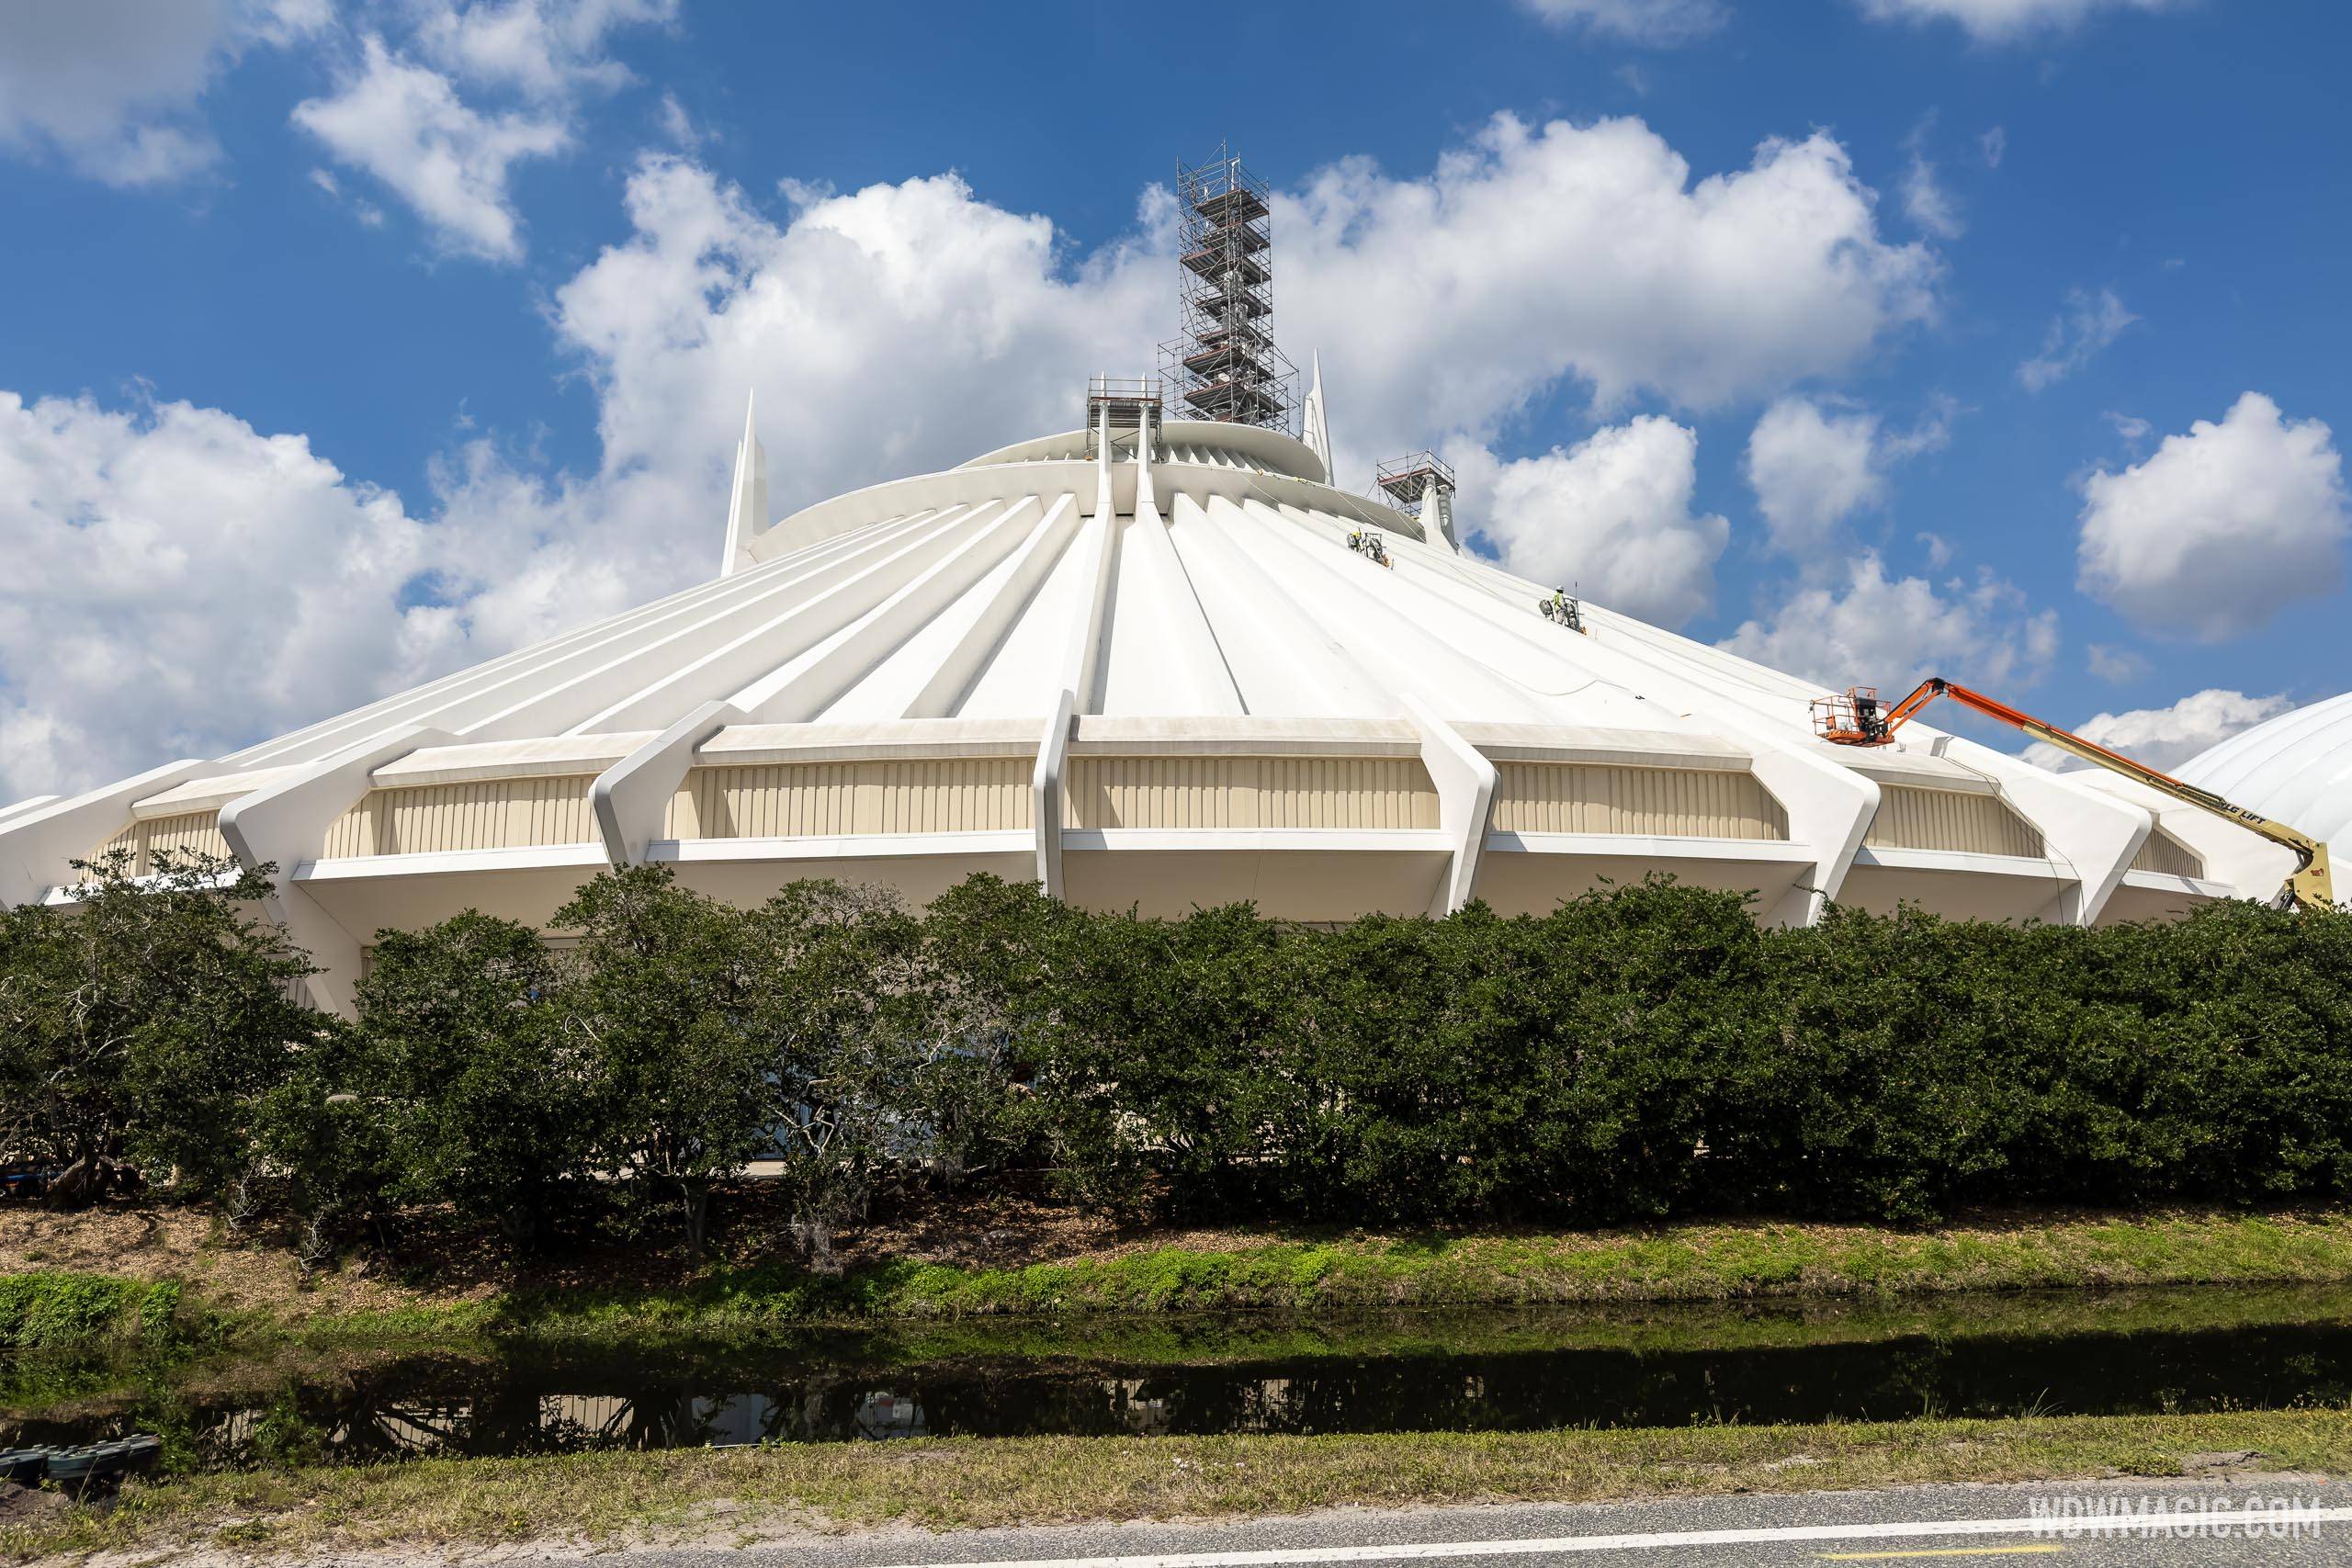 Space Mountain's new beige color scheme wraps around more of the iconic rollercoaster exterior